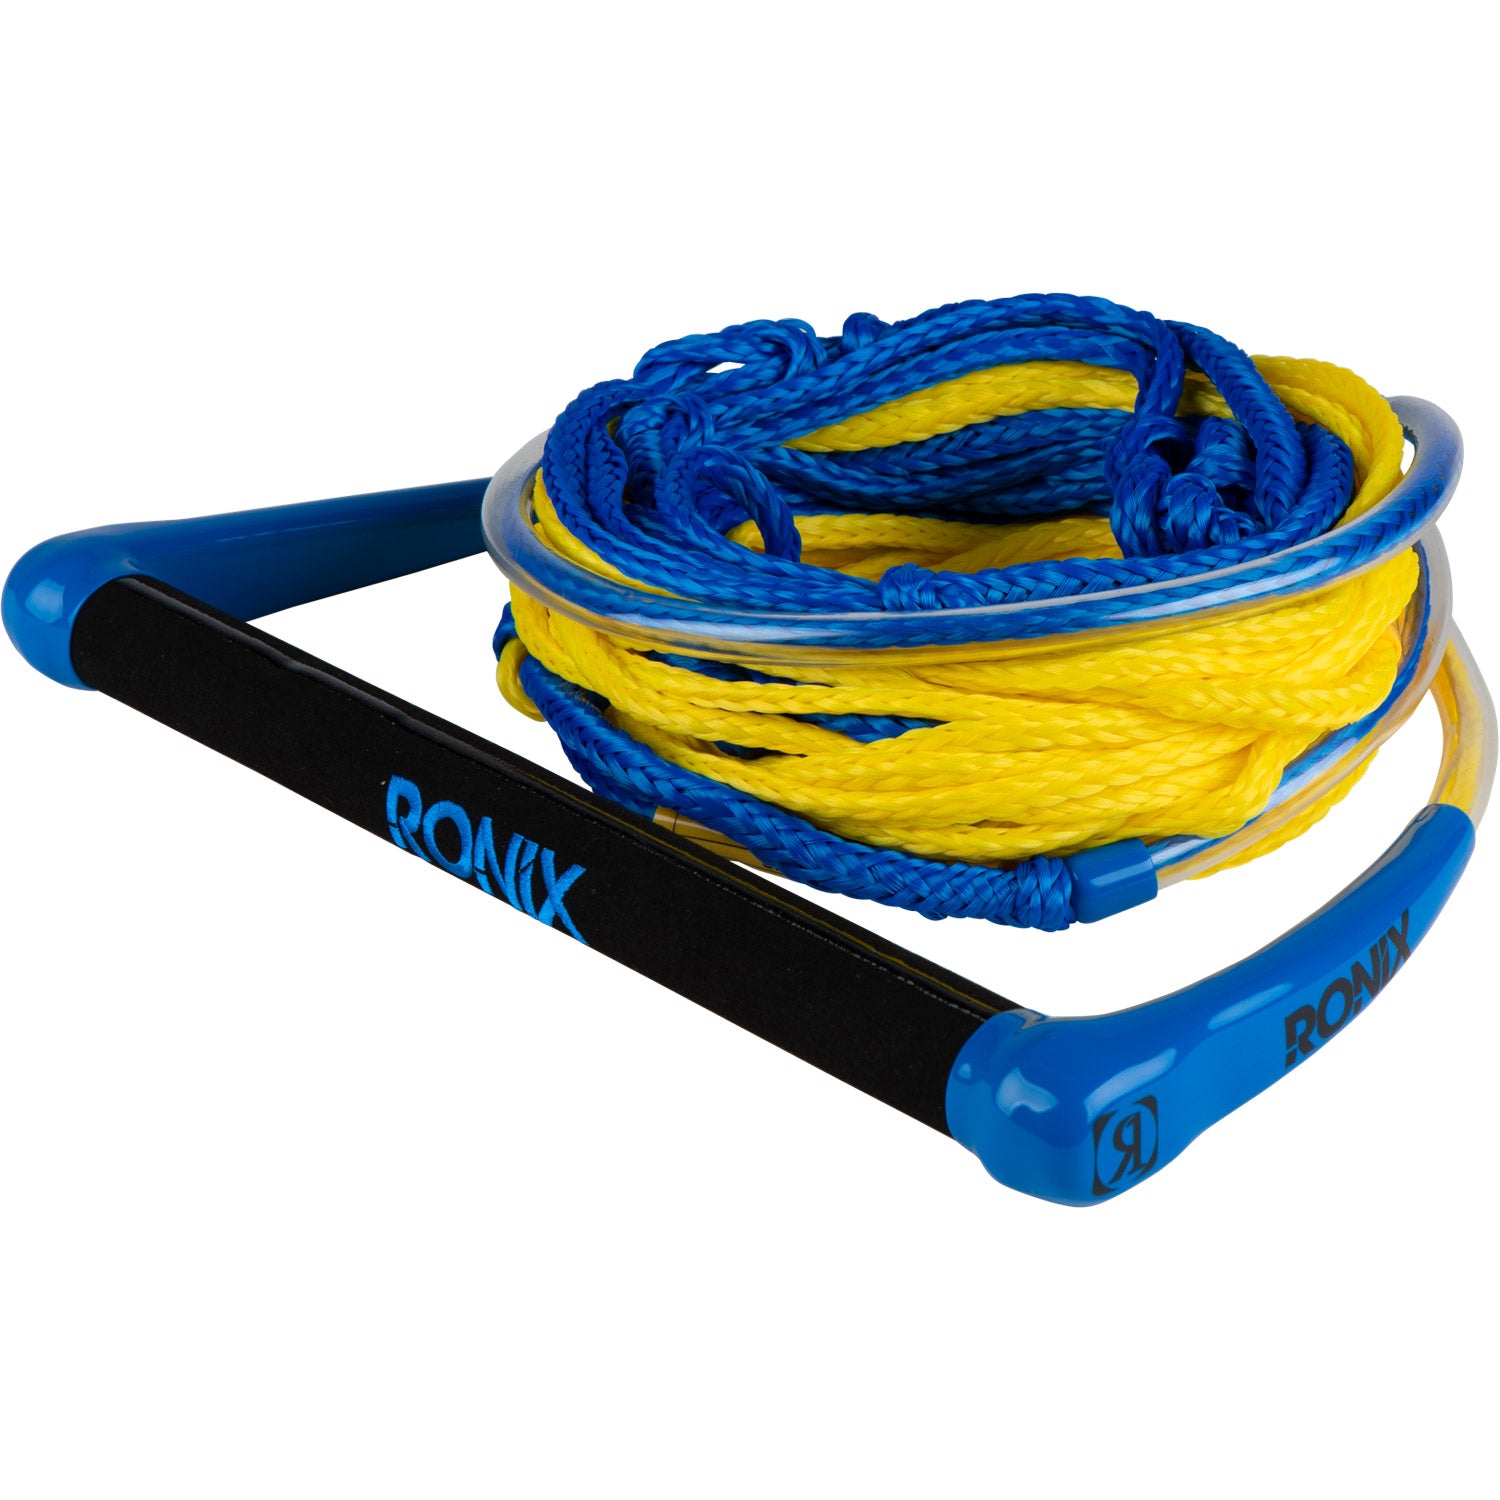 Combo 2.0 Wakeboard Rope Package